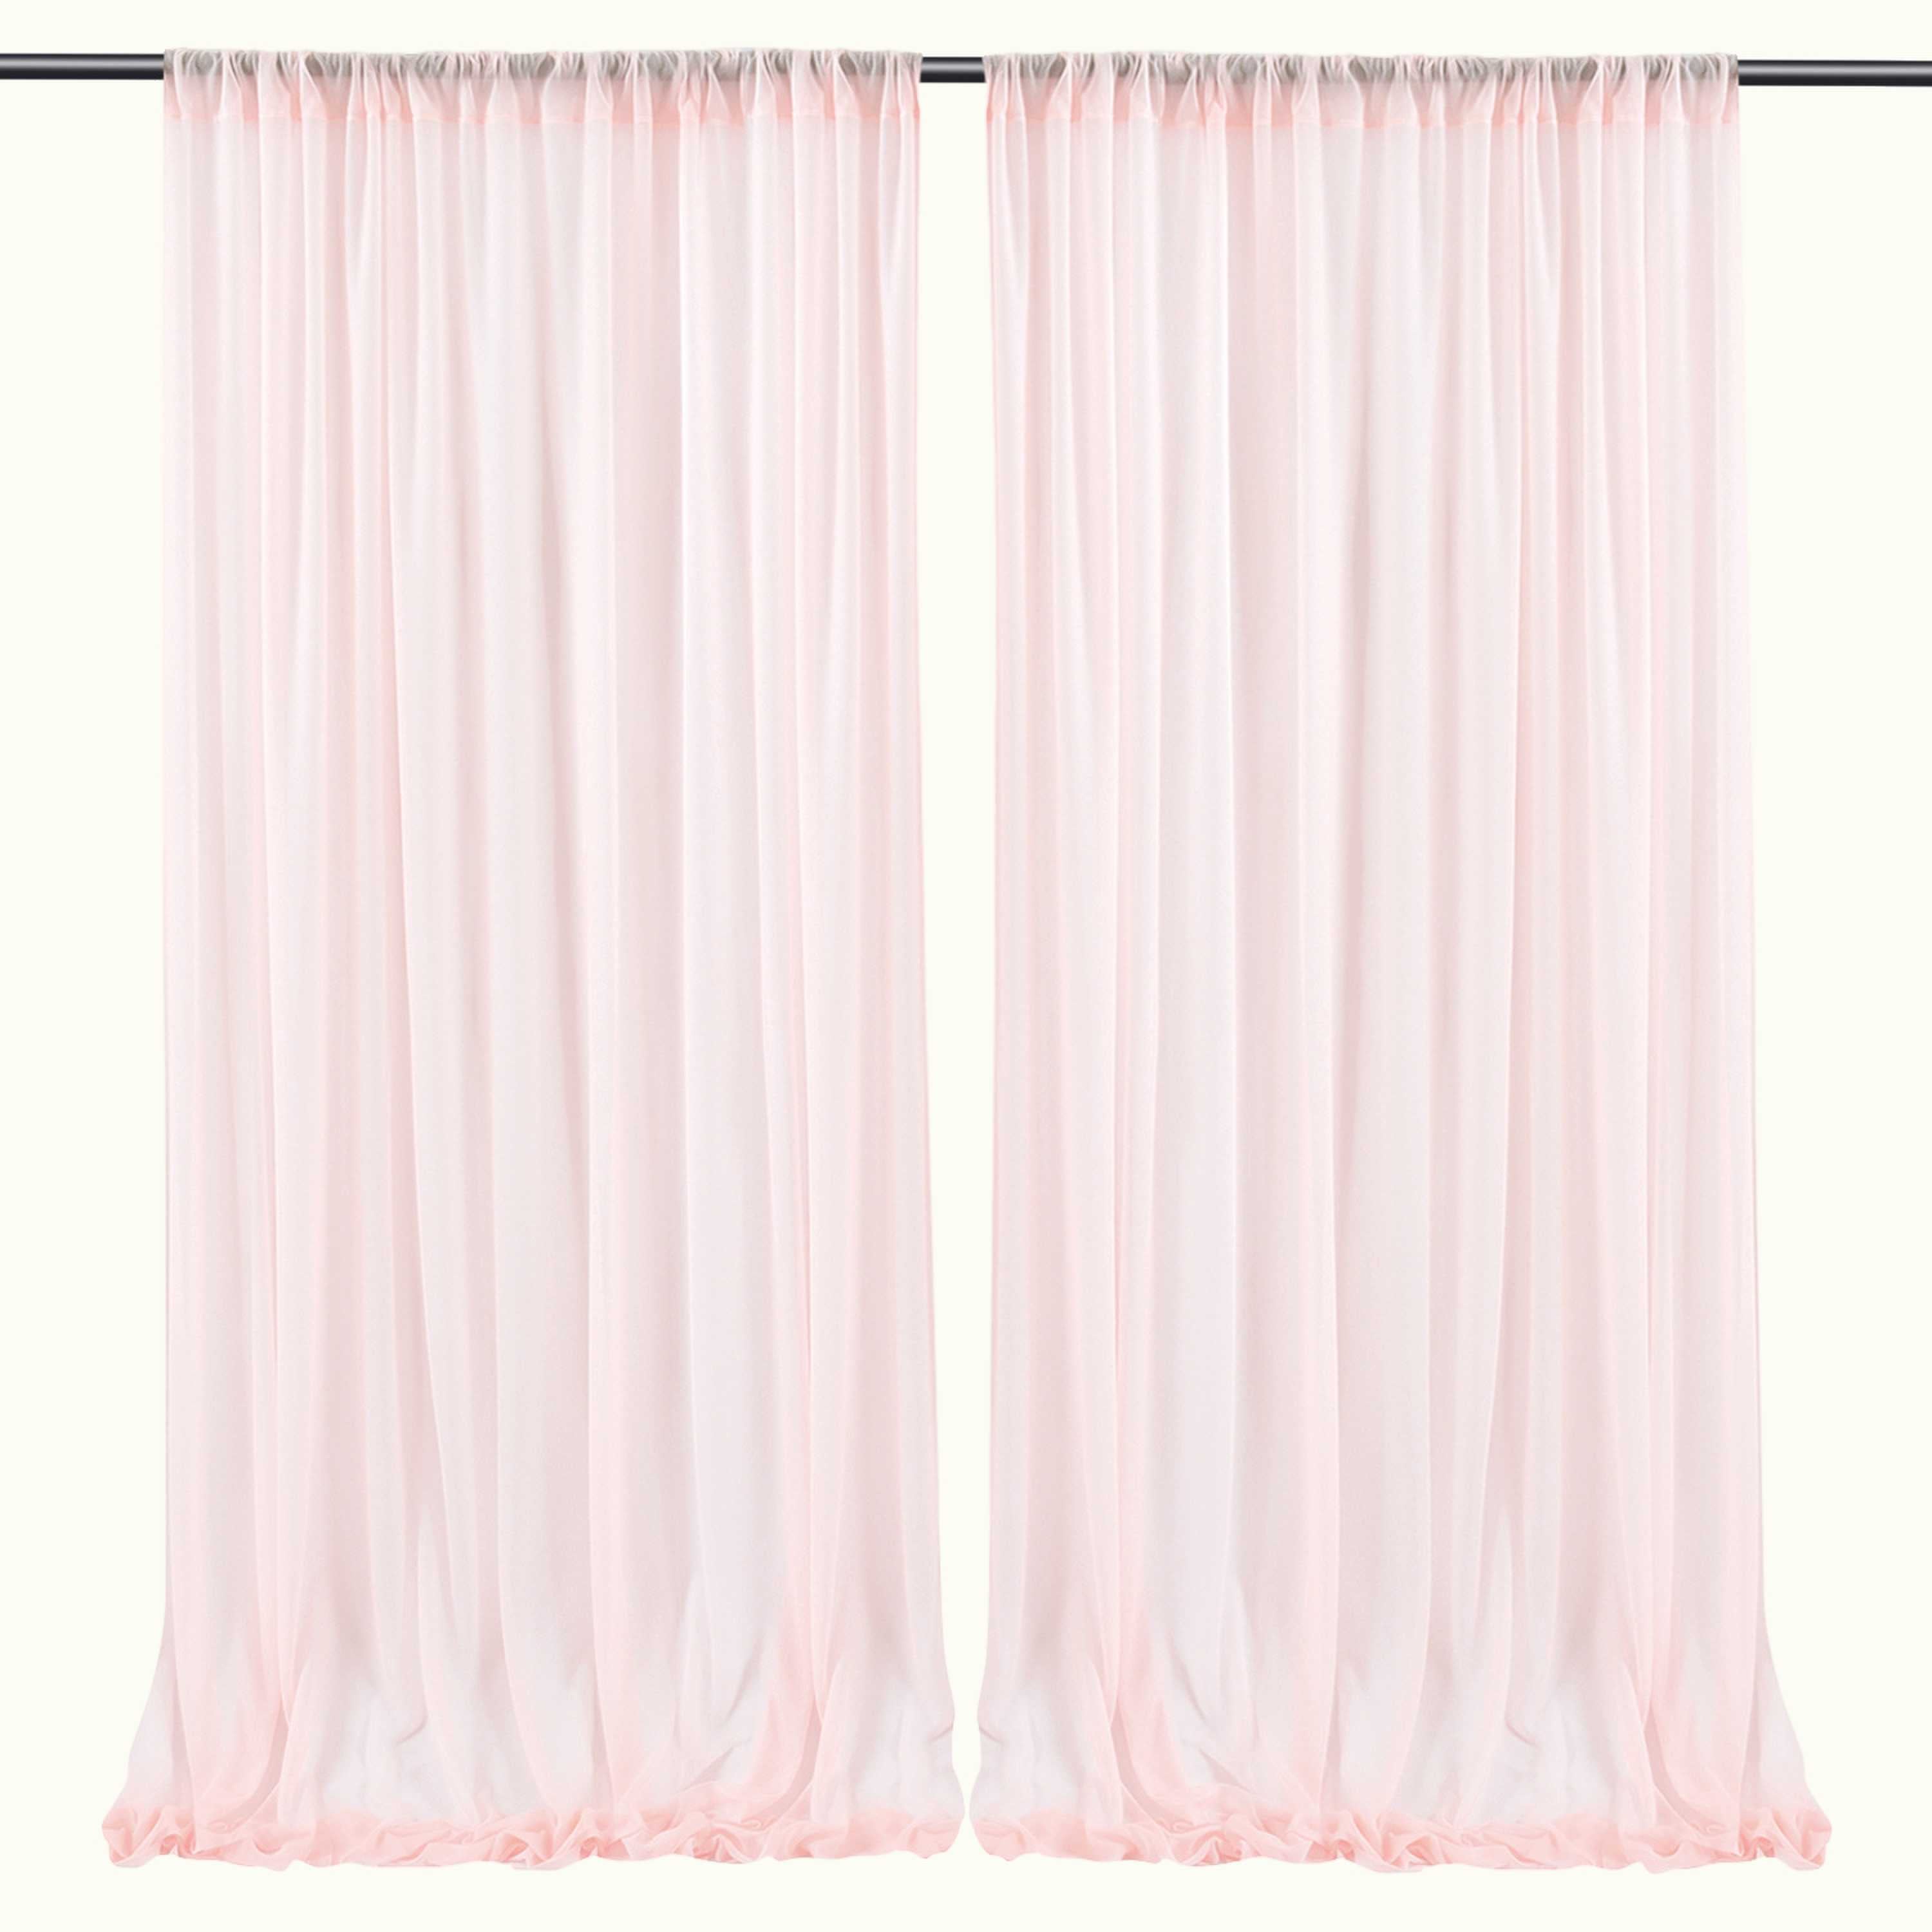 Chiffon Draping Curtains Draps Backdrop for Weeding Party Baby Shower Ceremony Window Decor